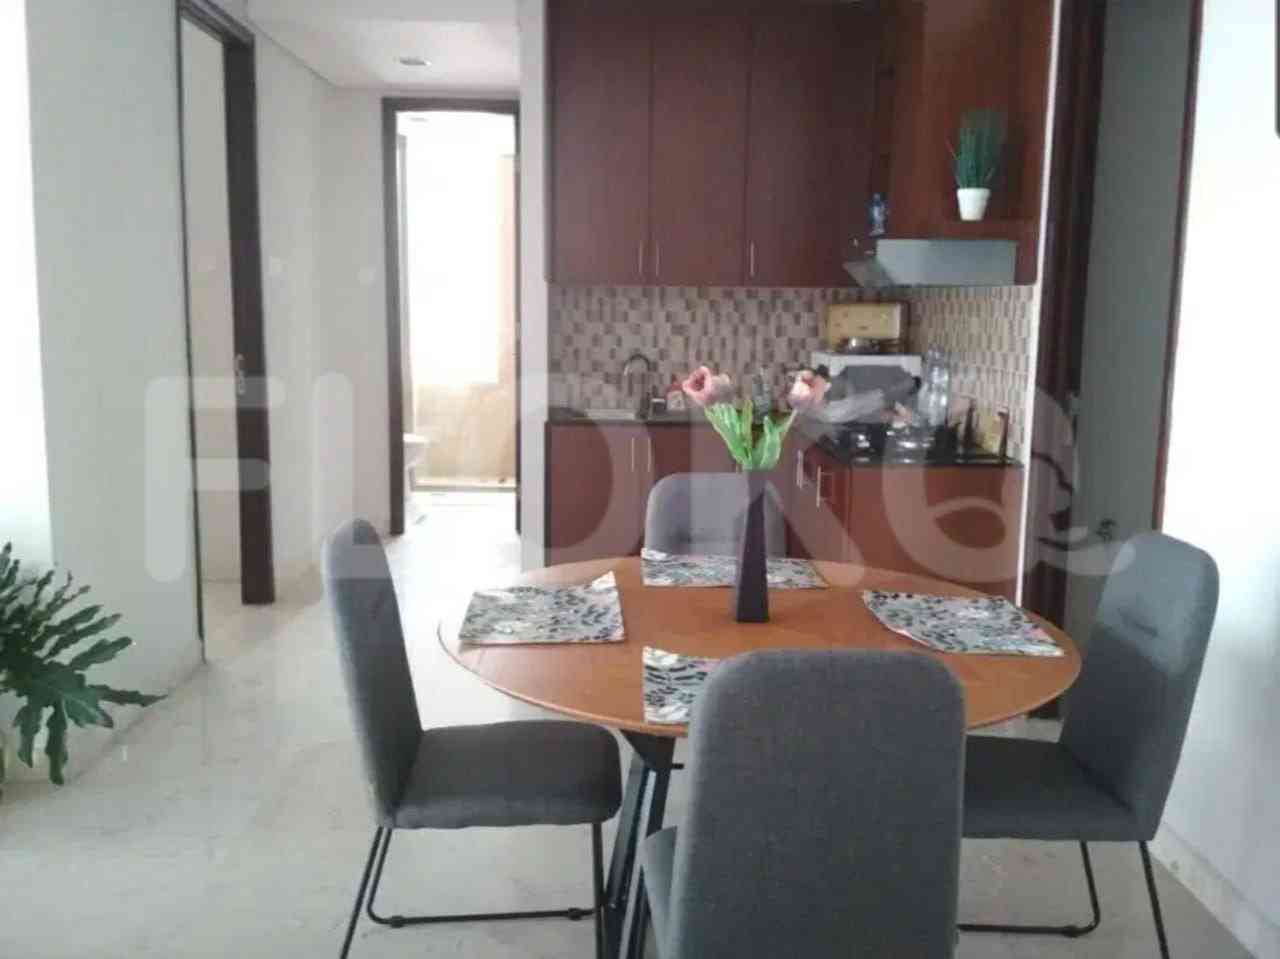 2 Bedroom on 18th Floor for Rent in The Grove Apartment - fkue65 1